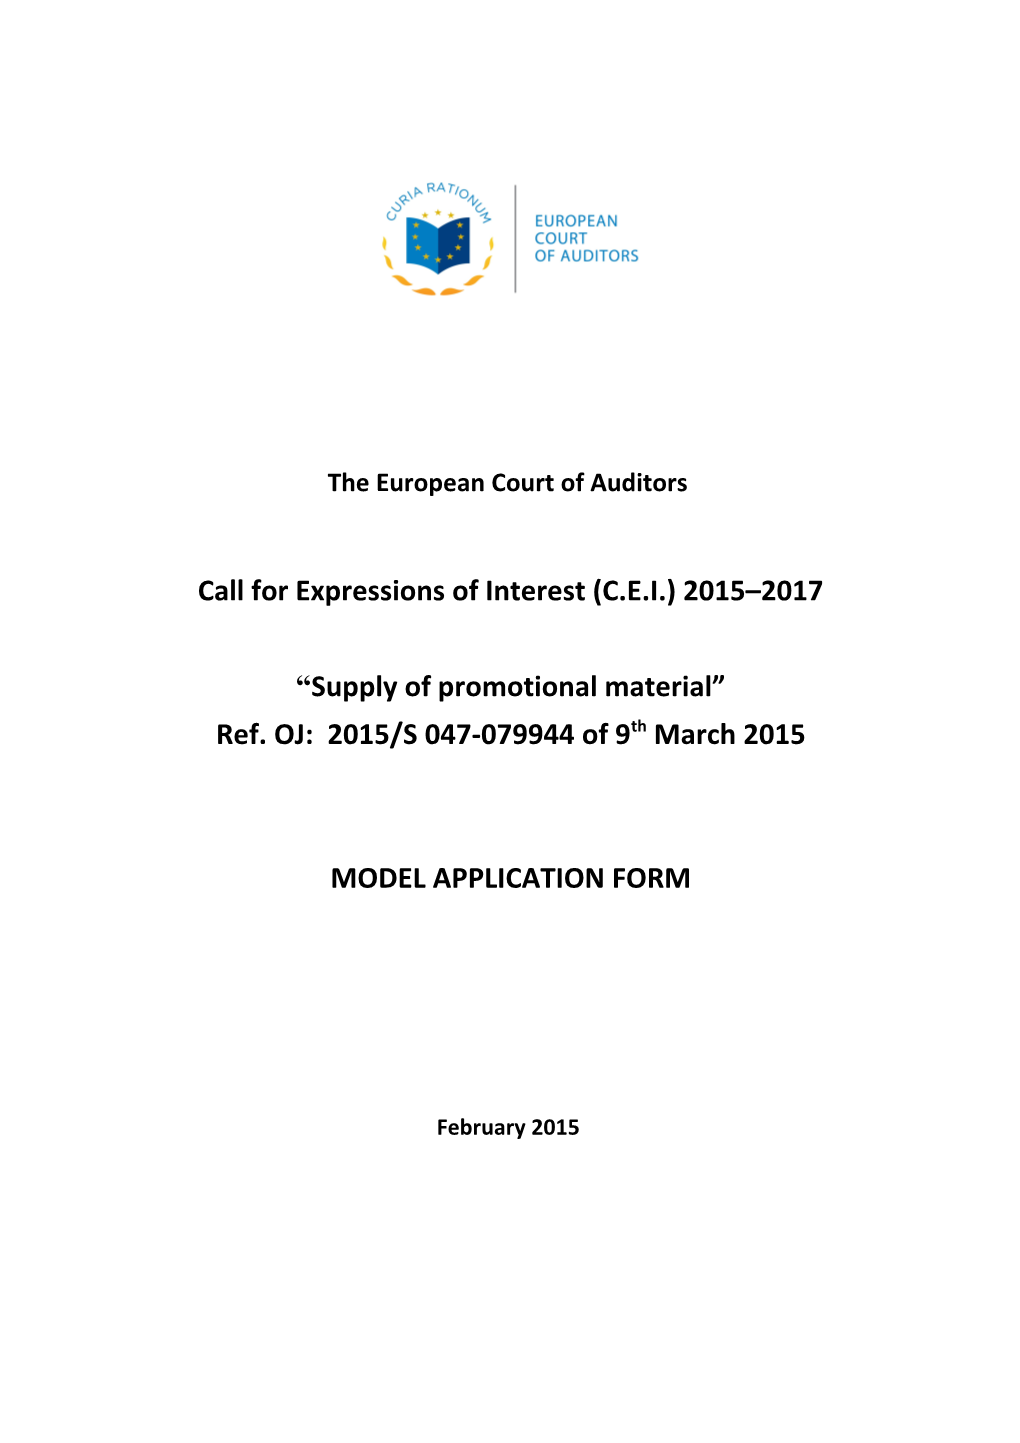 The European Court of Auditors